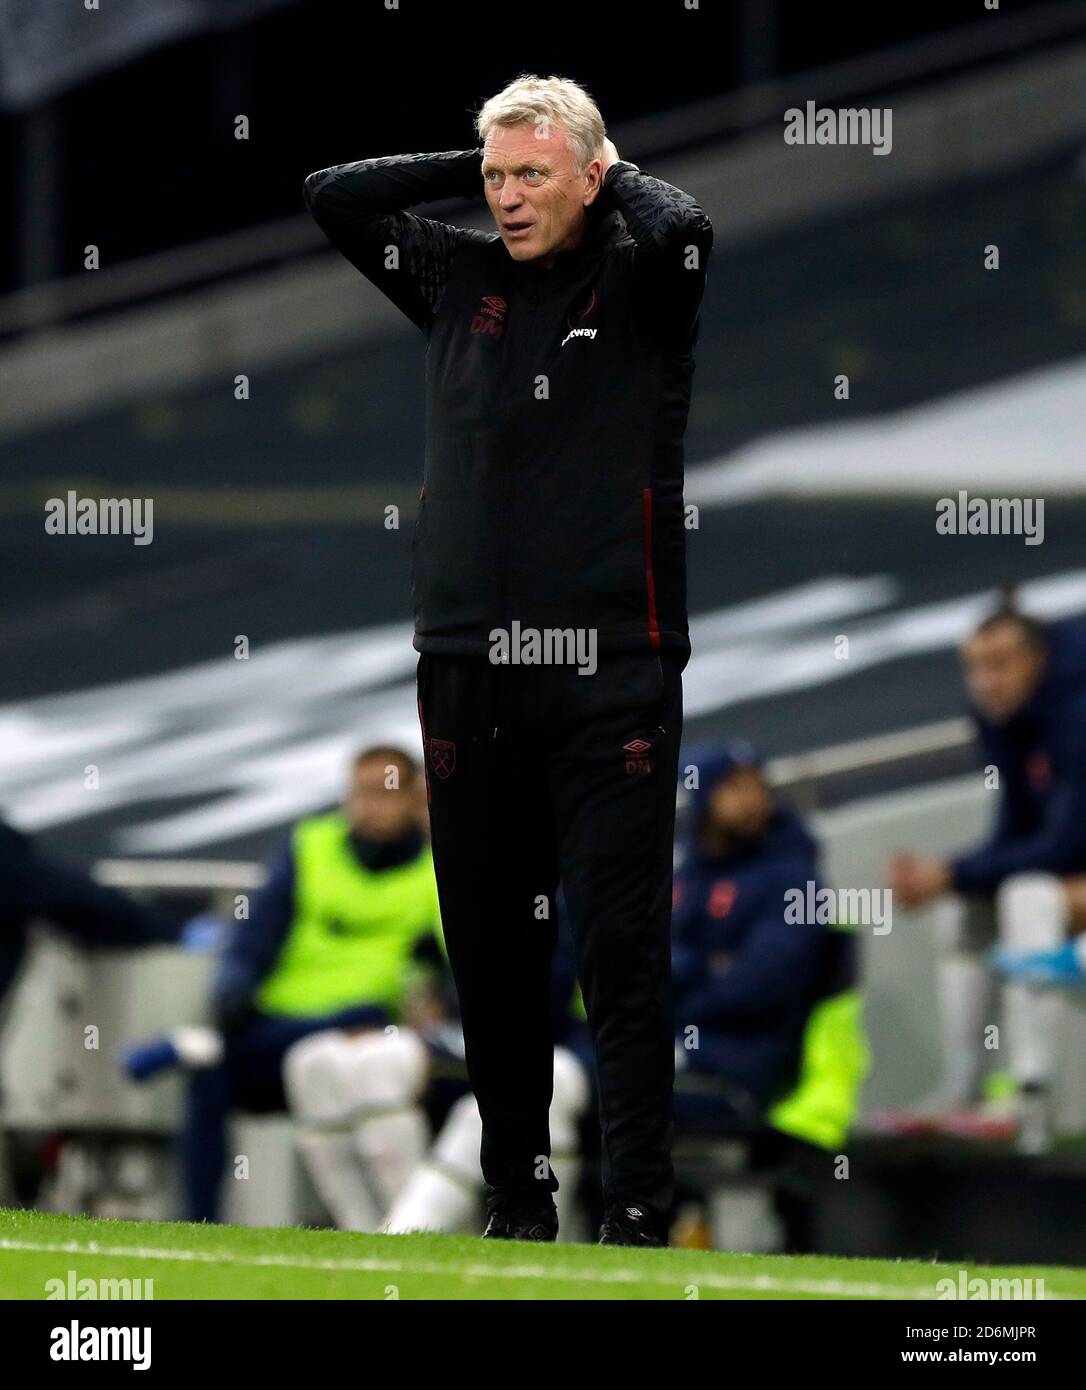 West Ham United manager David Moyes reacts on the touchline during the Premier League match at Tottenham Hotspur Stadium, London. Stock Photo